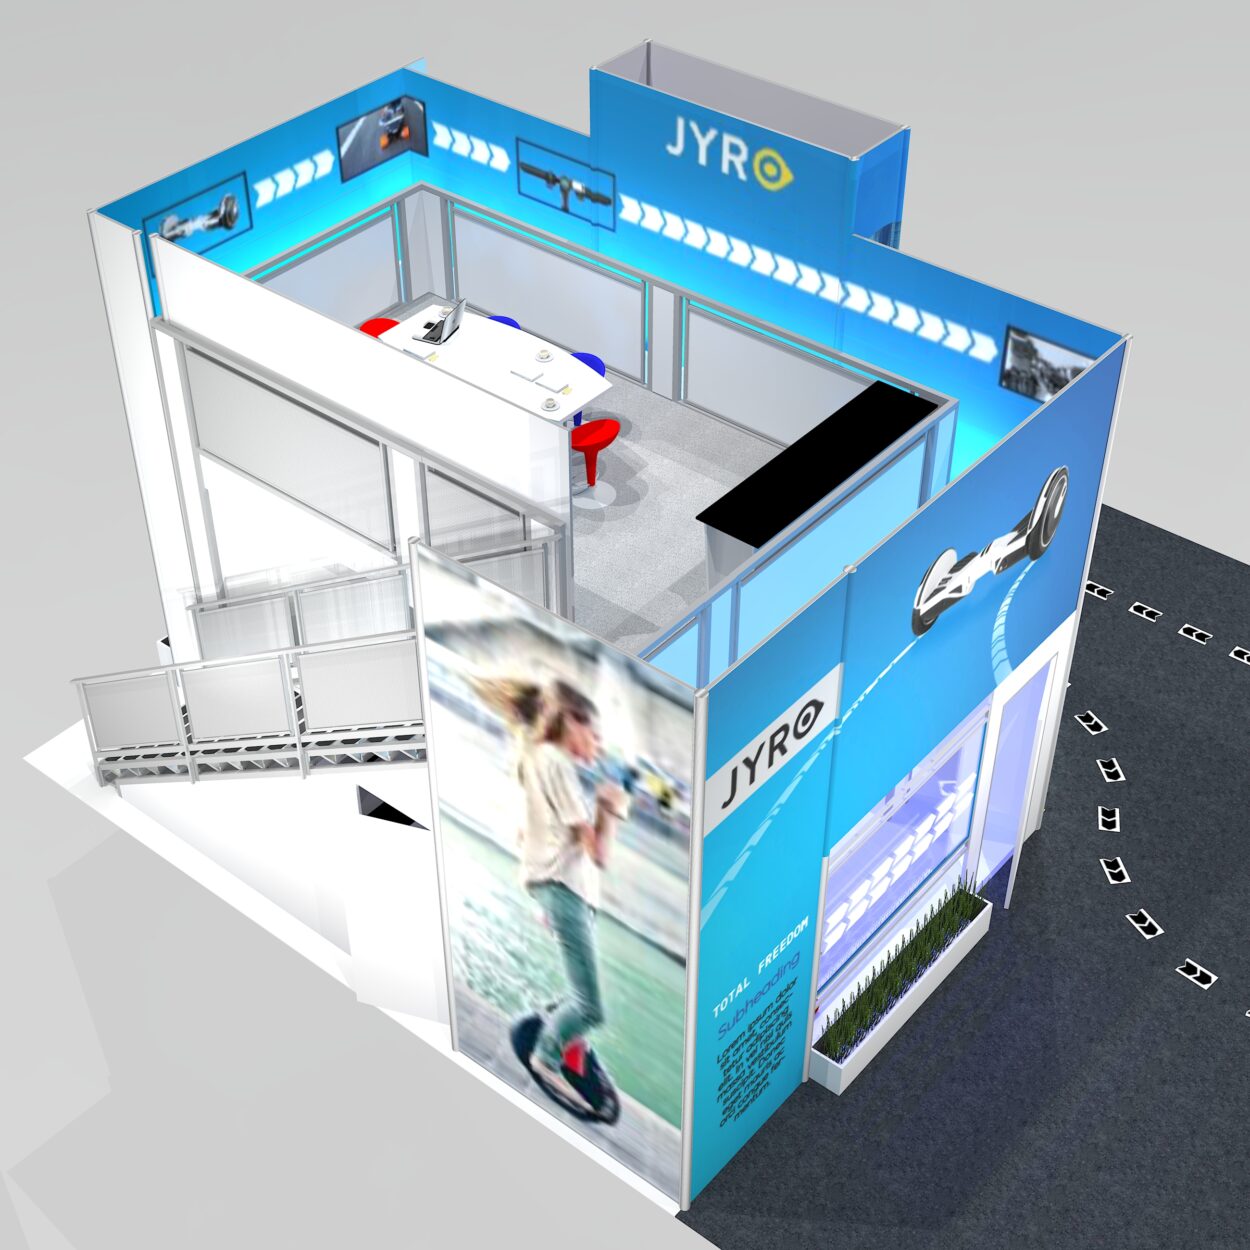 Custom Two Story Double Deck Trade Show Exhibit Rental With Large Graphic Walls